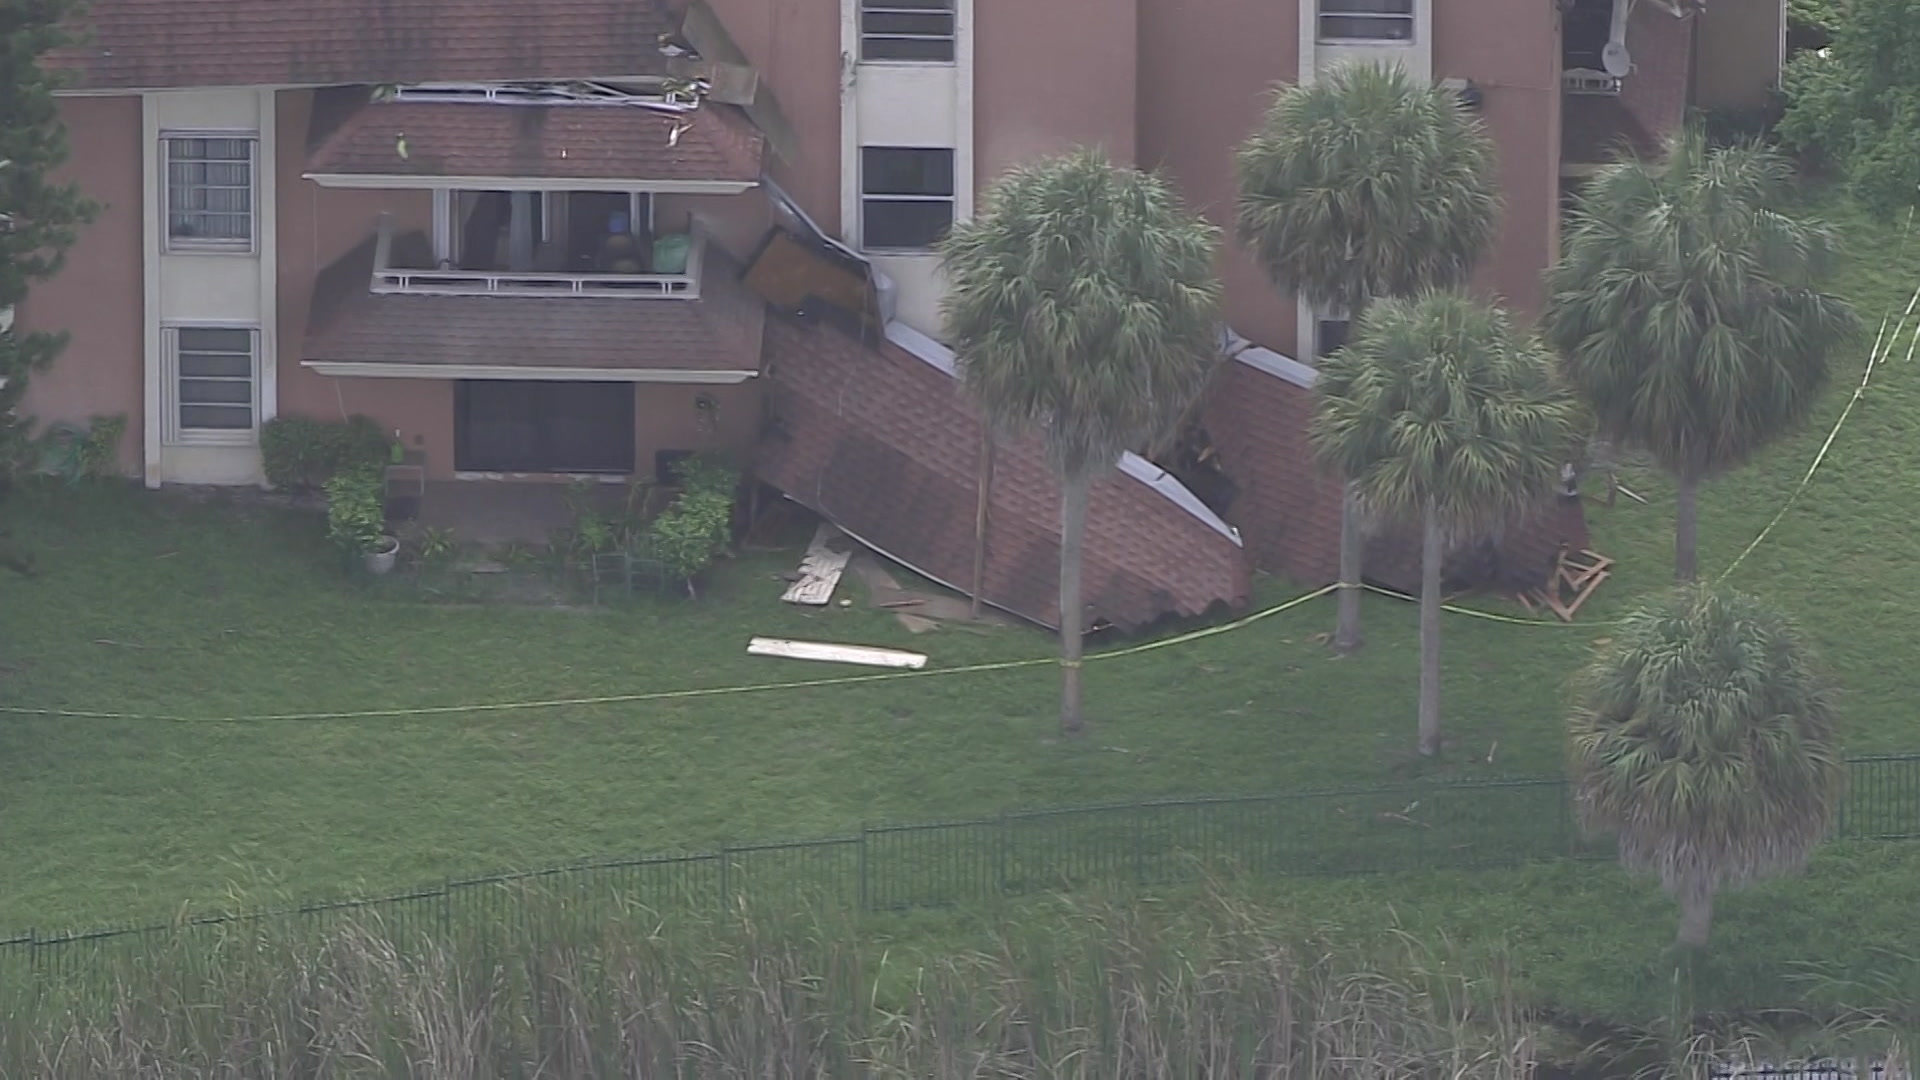 Partial Roof Overhang Collapse At NW Miami-Dade Condo, Similar Collapse At Building A Month Ago